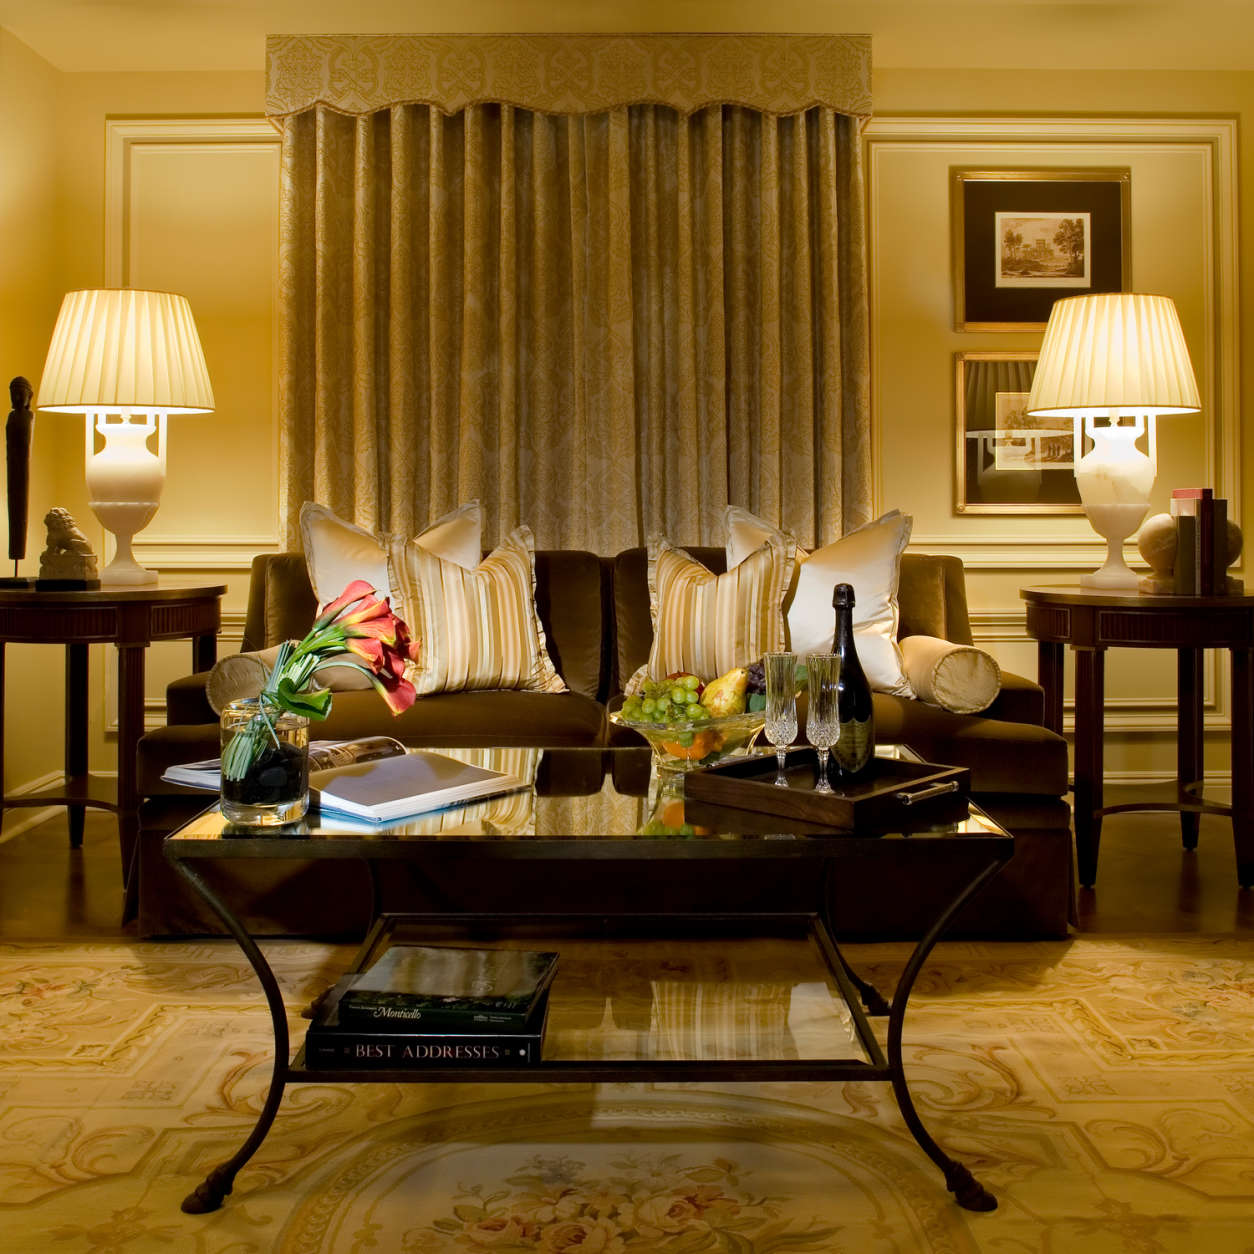 The Jefferson wins visitors over time and again with its sophisticated and traditionally decorated accommodations, impeccable service and award-winning cuisine. (Courtesy The Jefferson, Washington, DC)